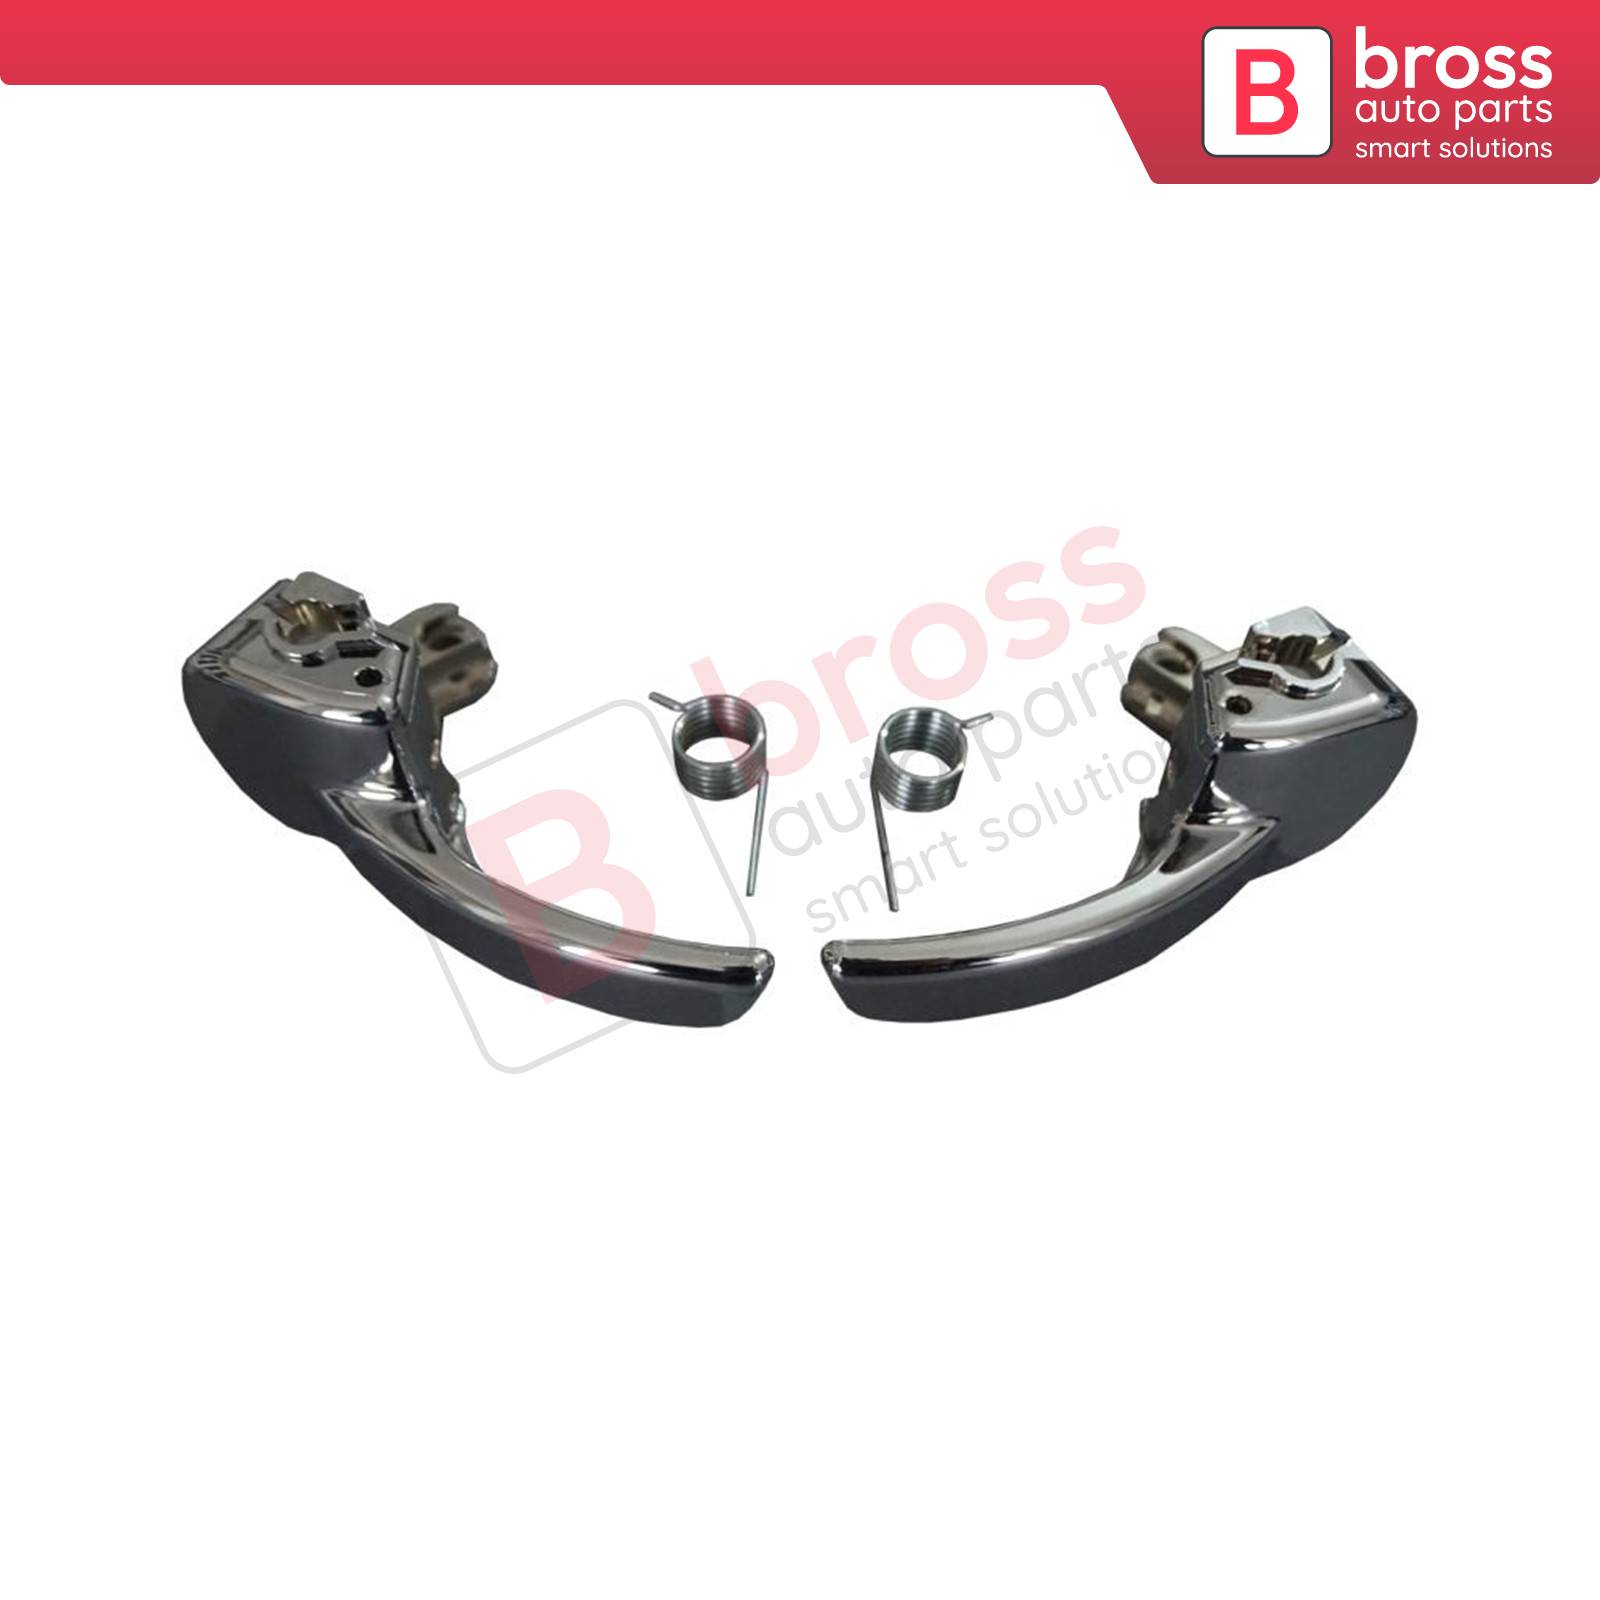 80671-jd00e Chrome Interior Left And Right Interior Door Handle For Qashqai  (pack Of 2) 80670-jd00e